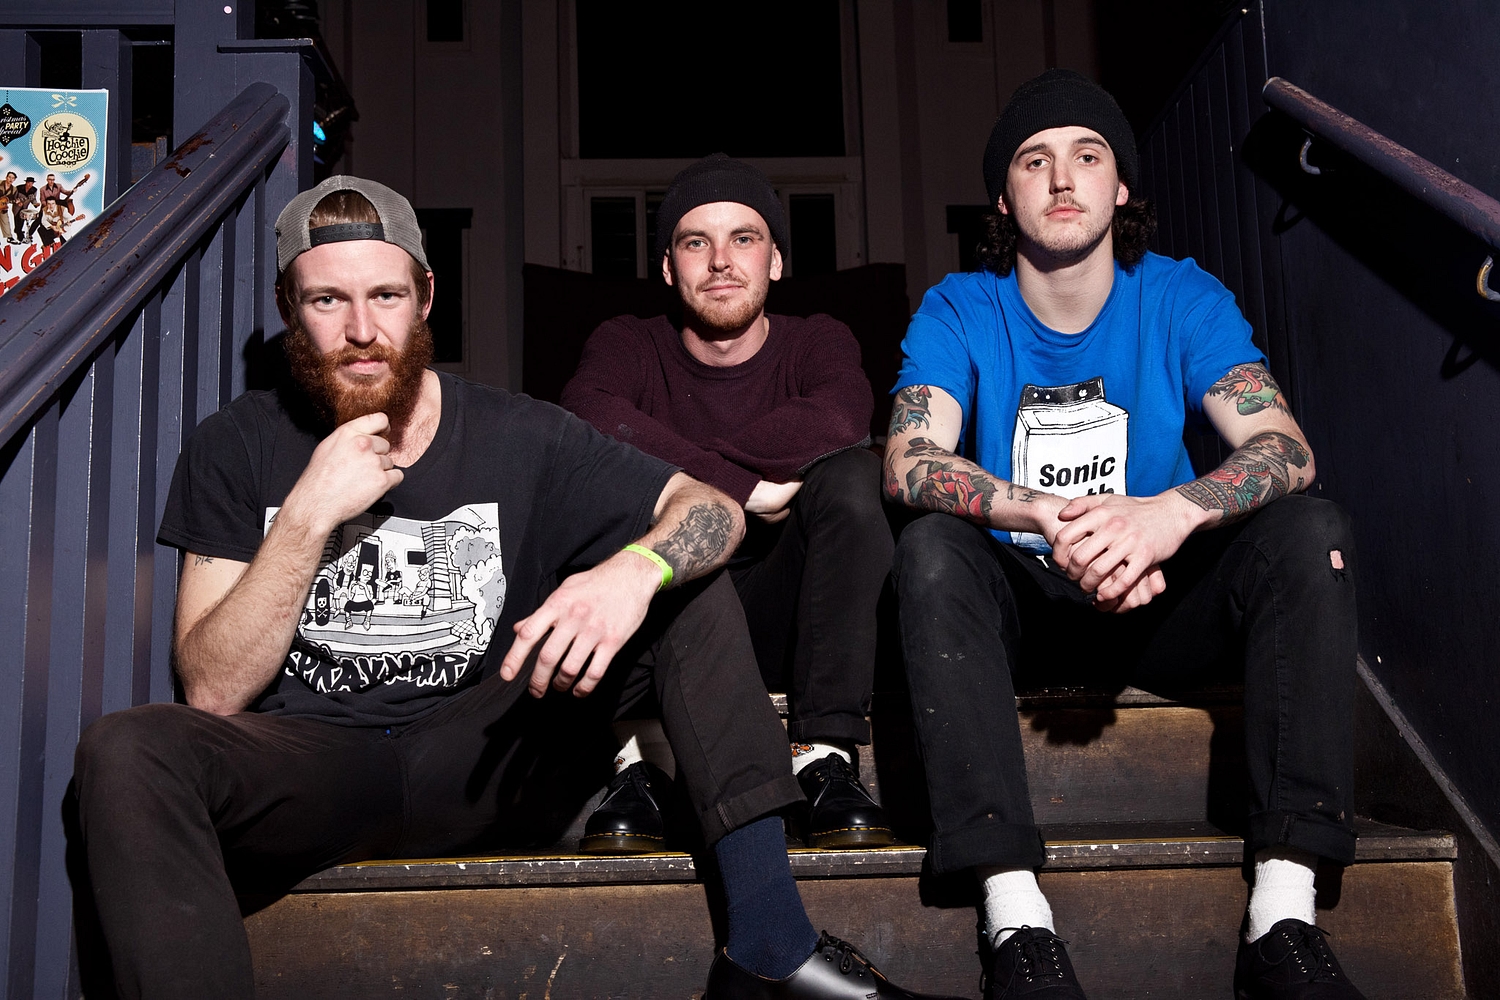 Win fifty tickets for Gnarwolves’ album launch party with DIY